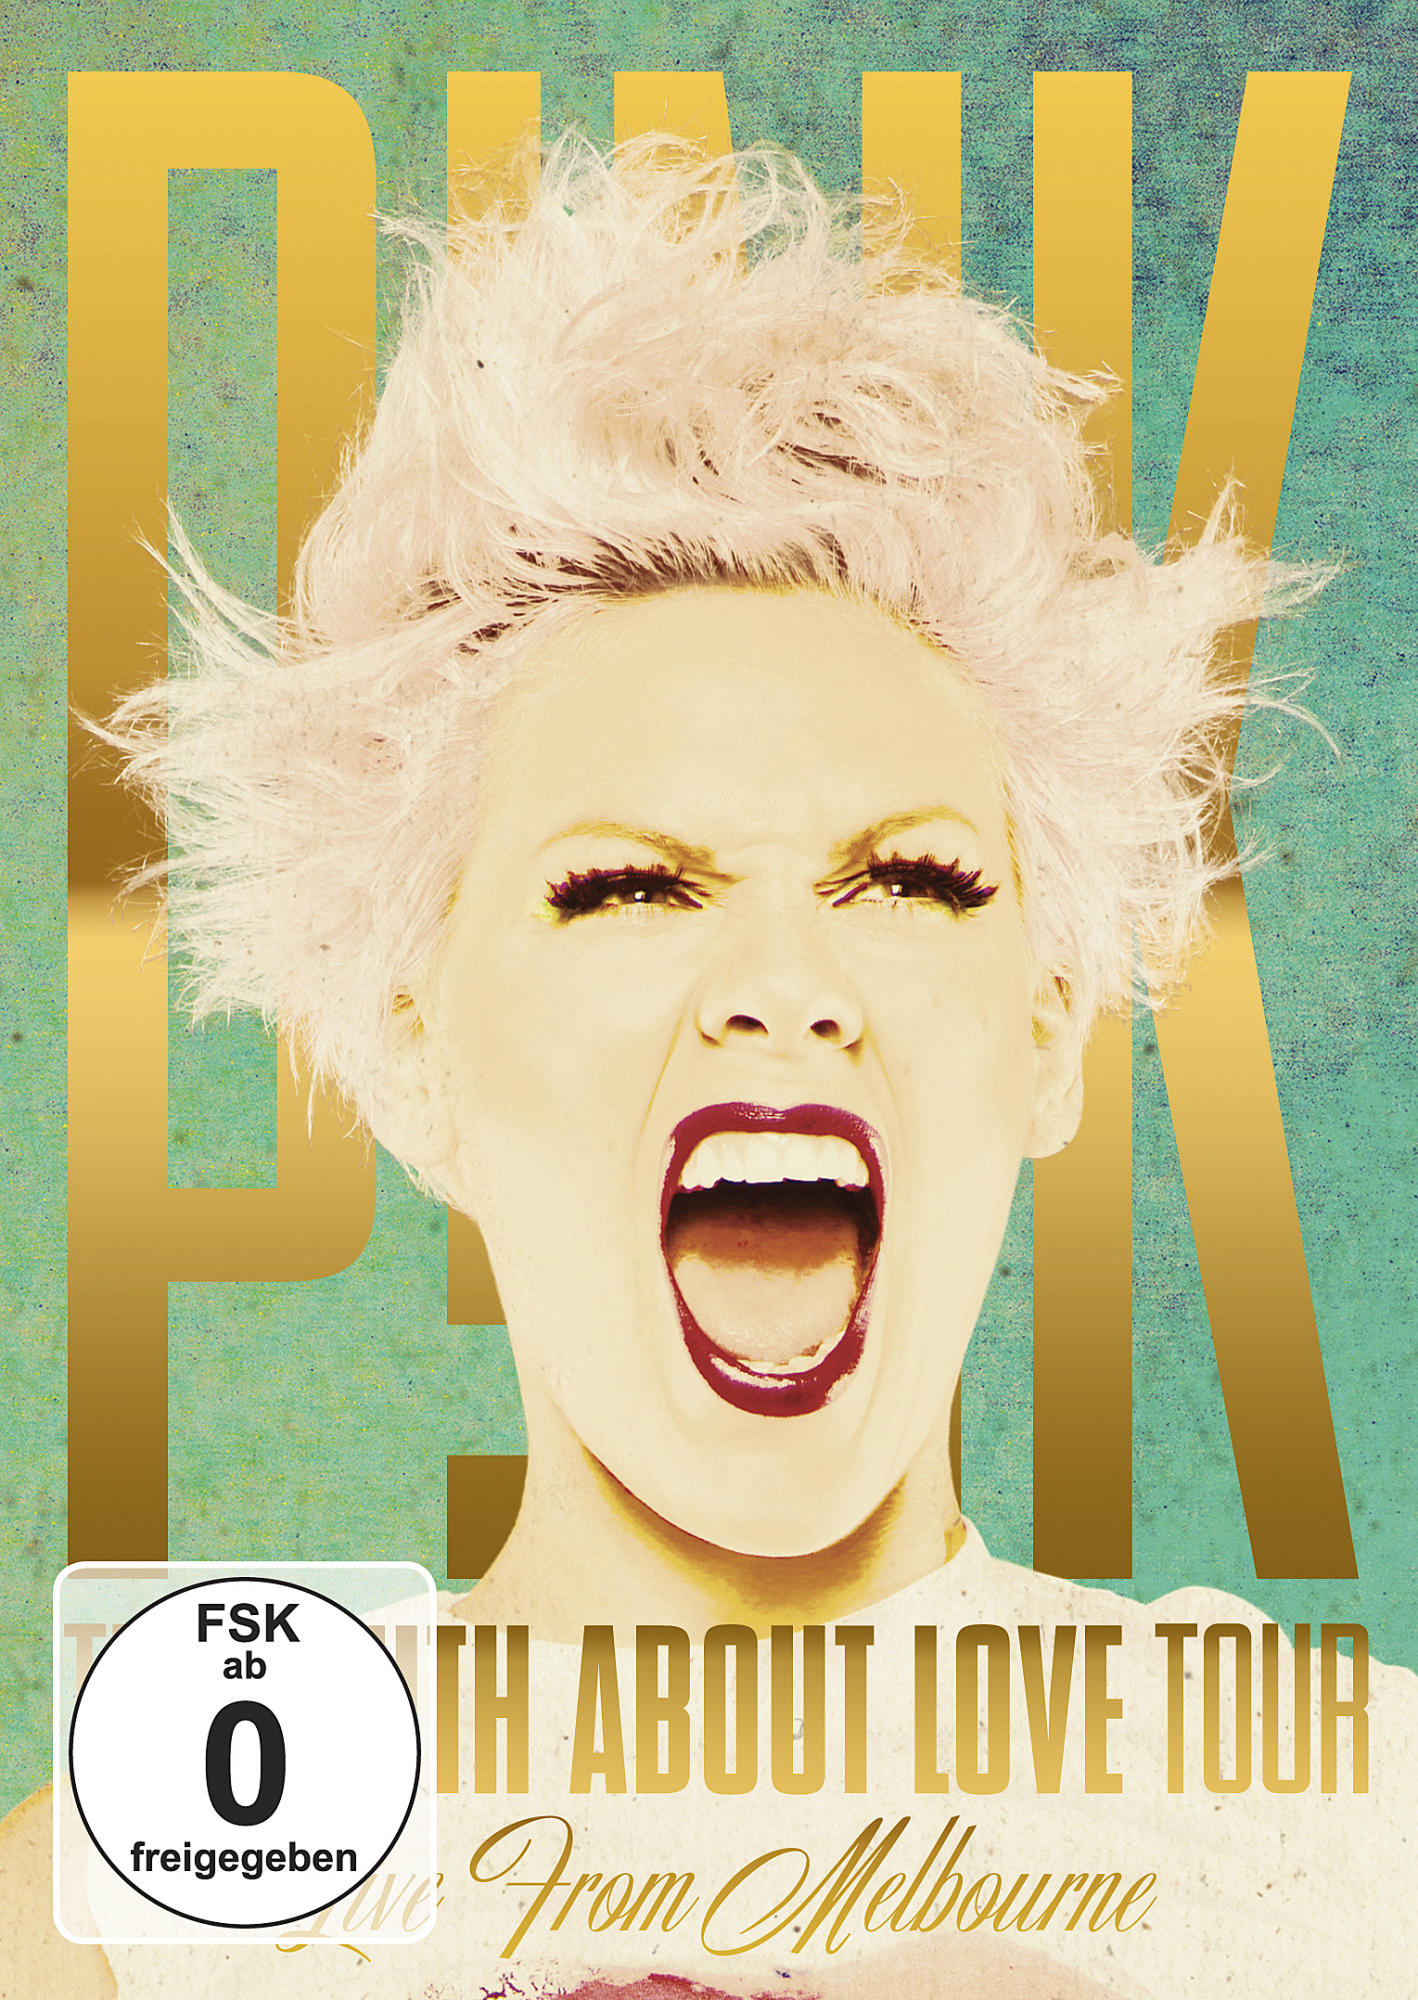 P!nk - The (DVD) - Love From About Live Truth Melbourne Tour